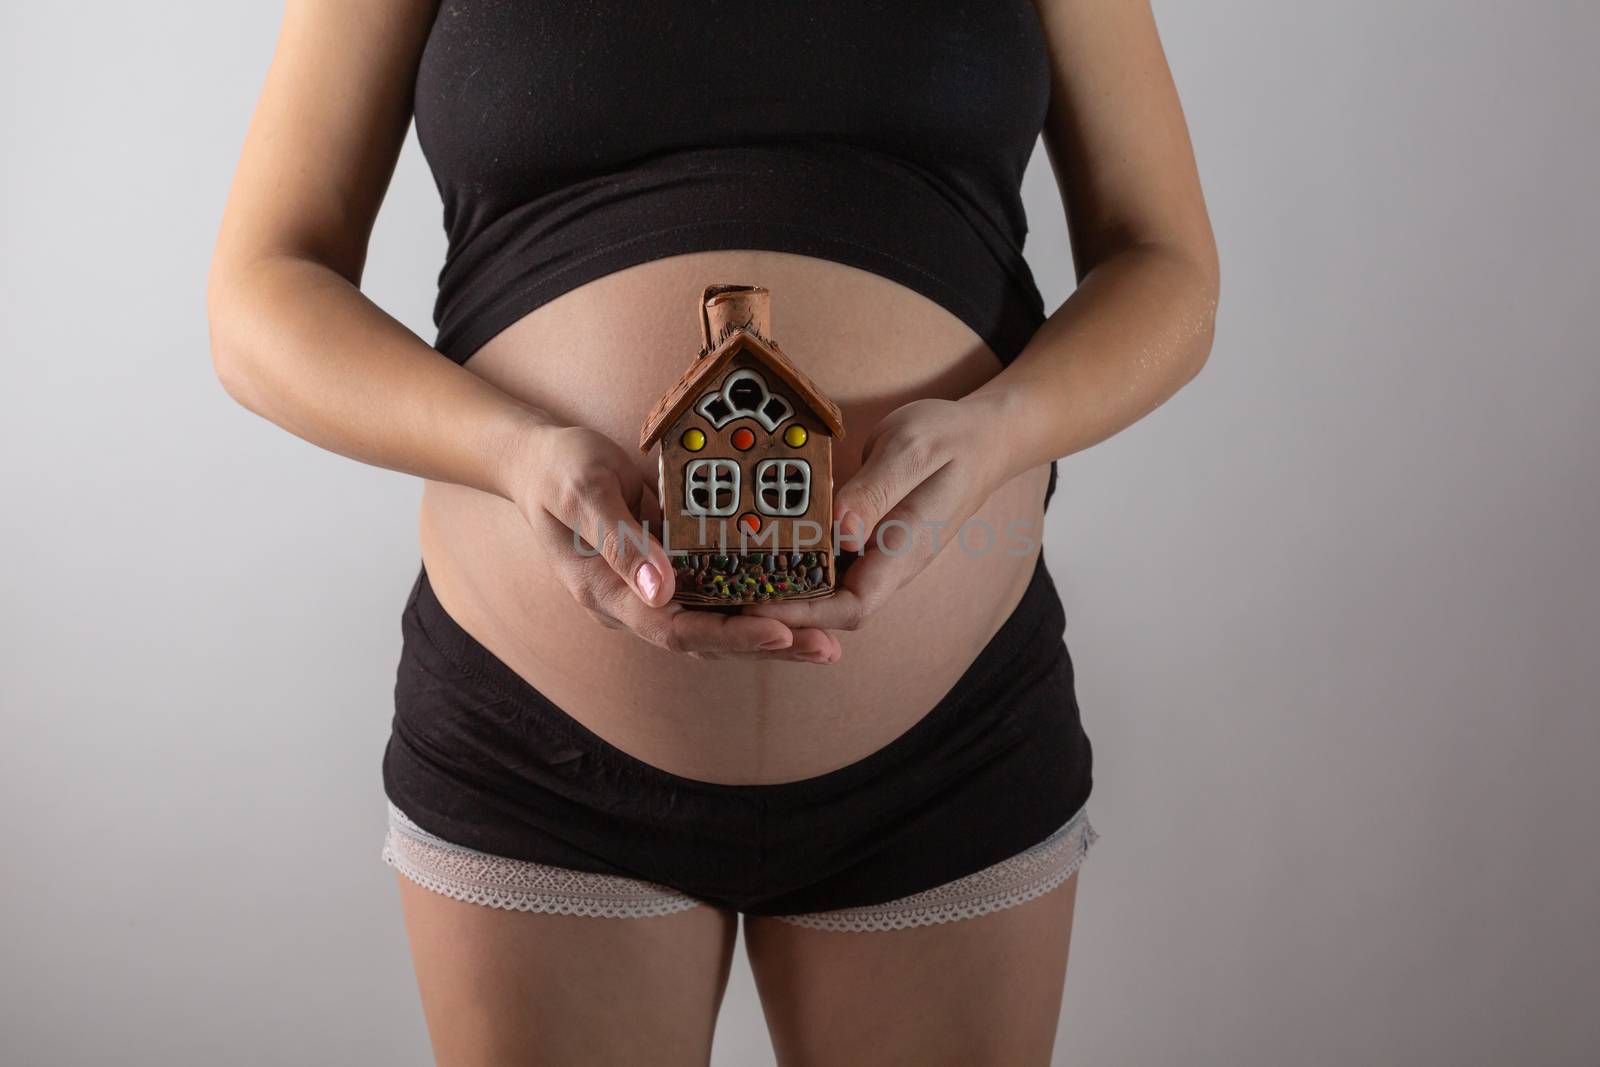 Getting a home loan while pregnant